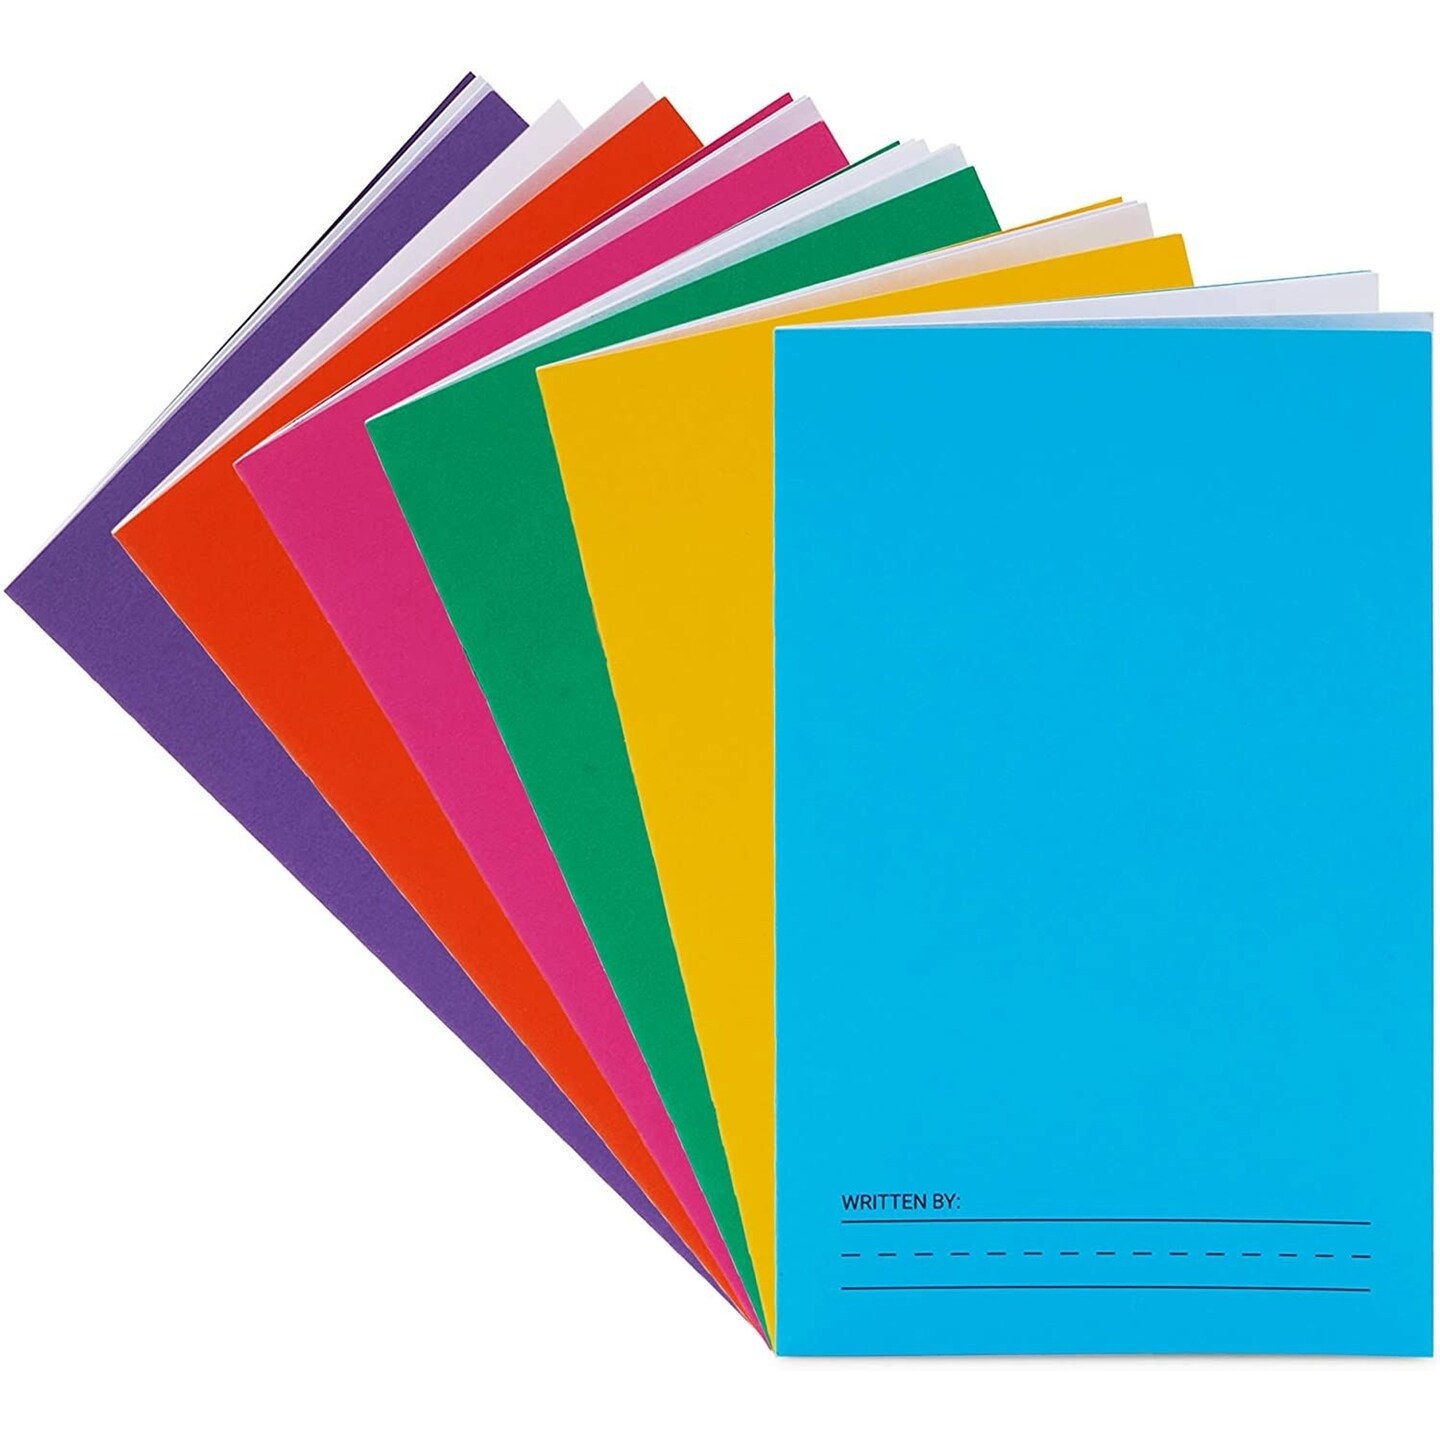 blank-story-books-for-kids-paperback-story-lined-6-colors-5-5-x-8-5-in-6-pack-michaels